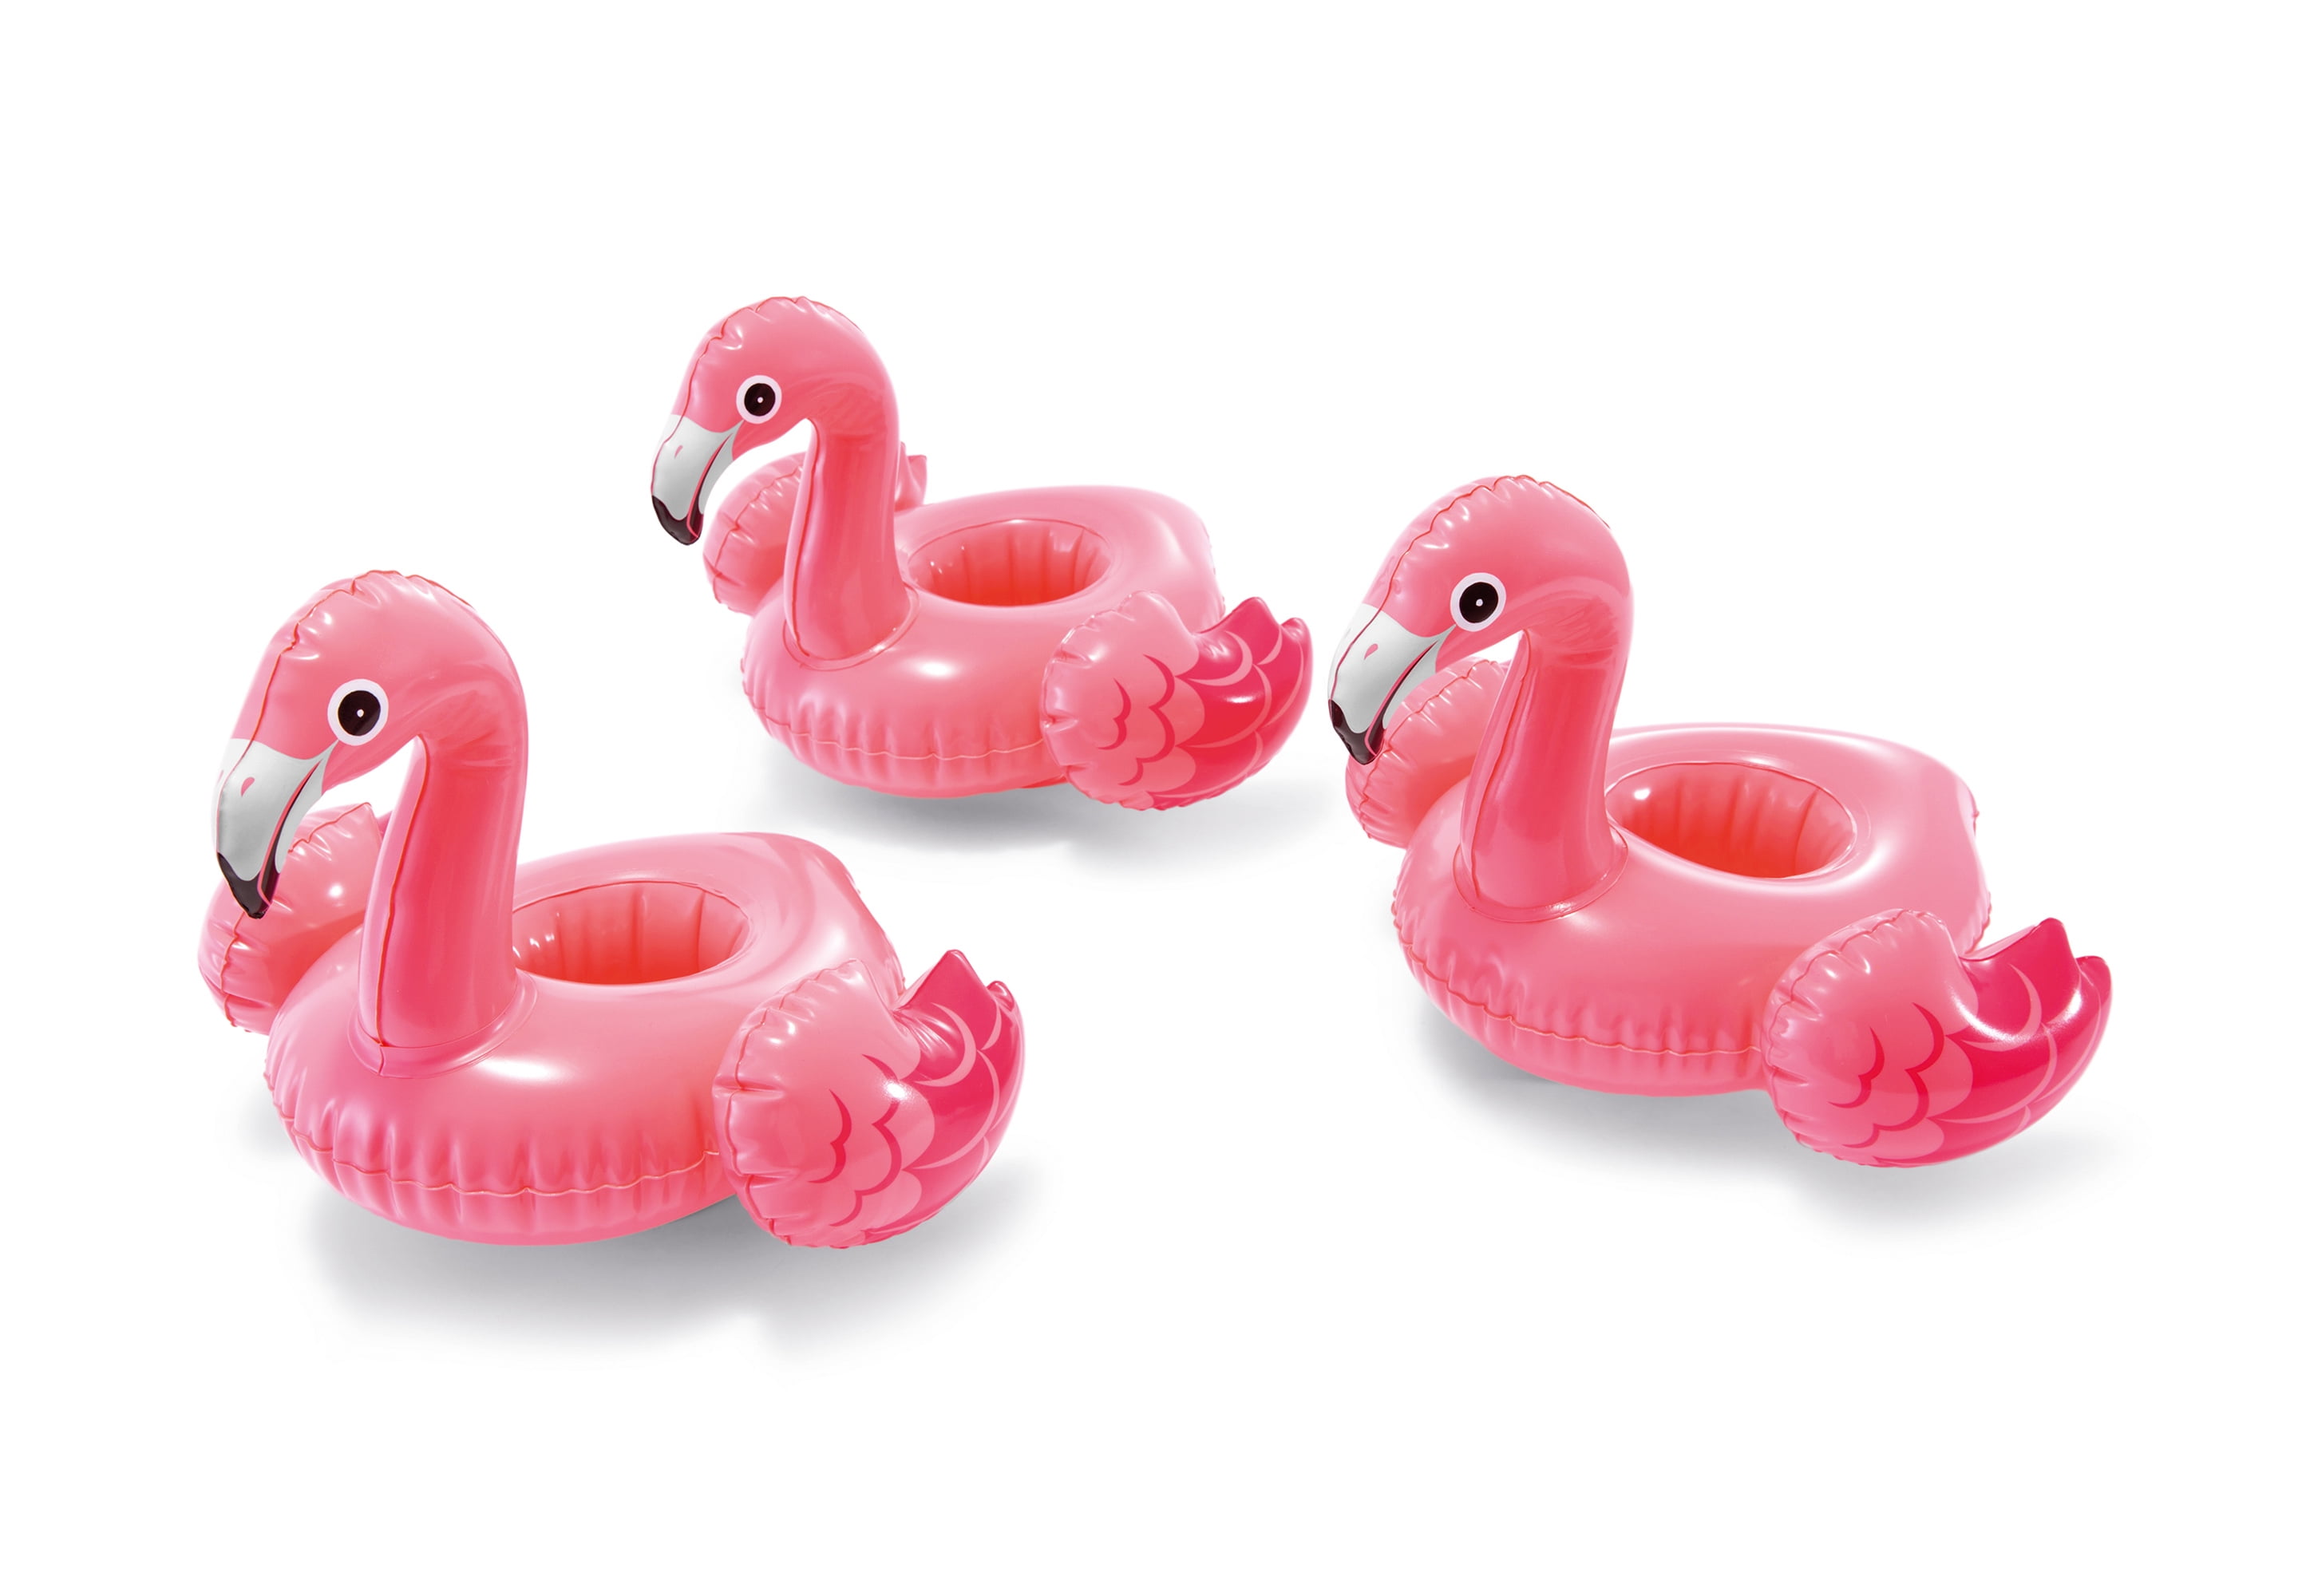 PVC Inflatable Drink Holder, Pool Drink Floats Inflatable Cup Holders Party  Accessories Cup Flamingo Coasters for Swimming Pool Party Beach & Kids  Water Bath Fun Toys Only $3.99 PatPat US Mobile